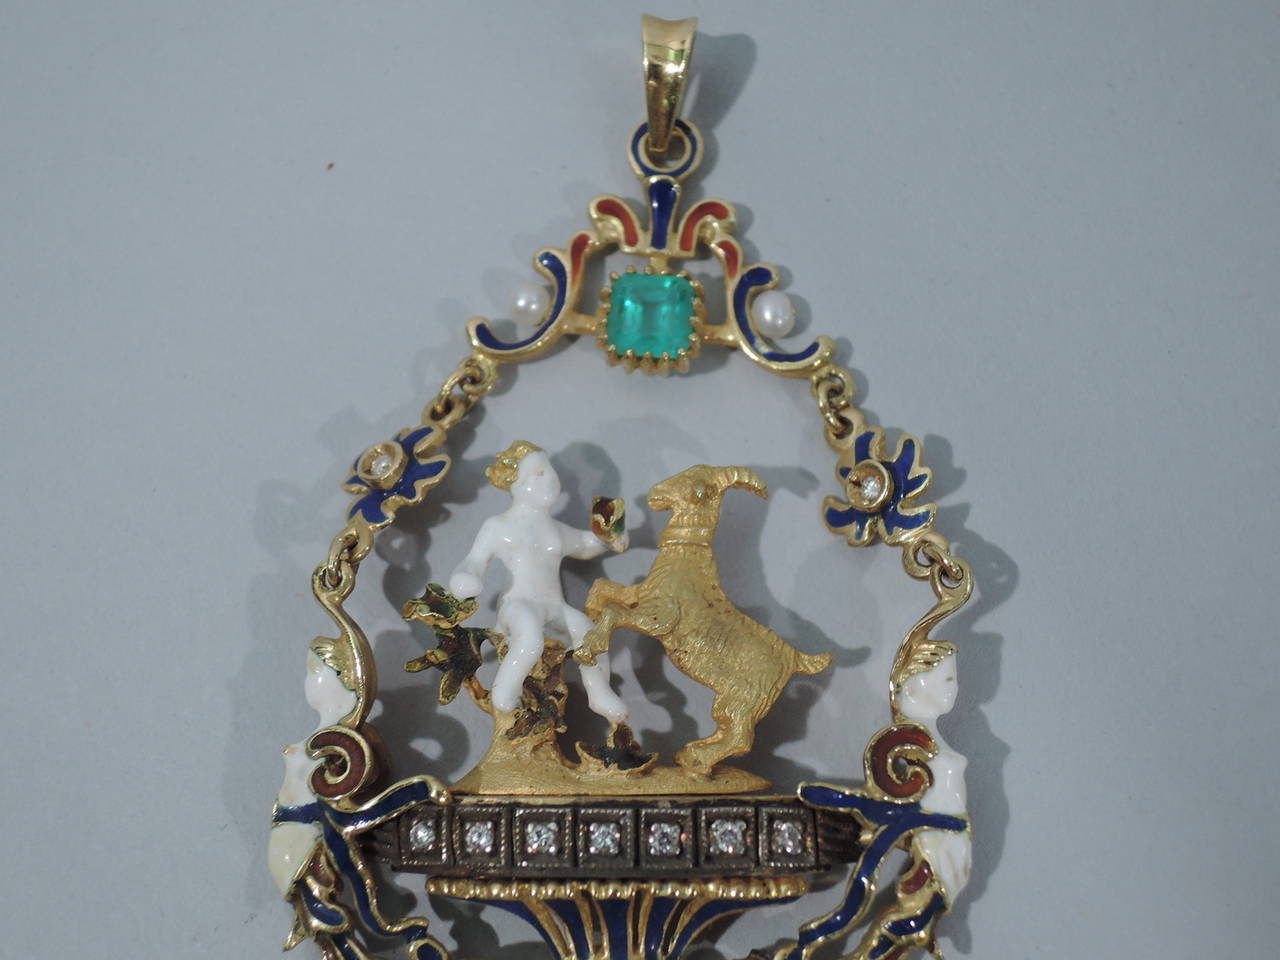 Women's Renaissance Revival Gold and Enamel Pendant with Pearls and Emeralds